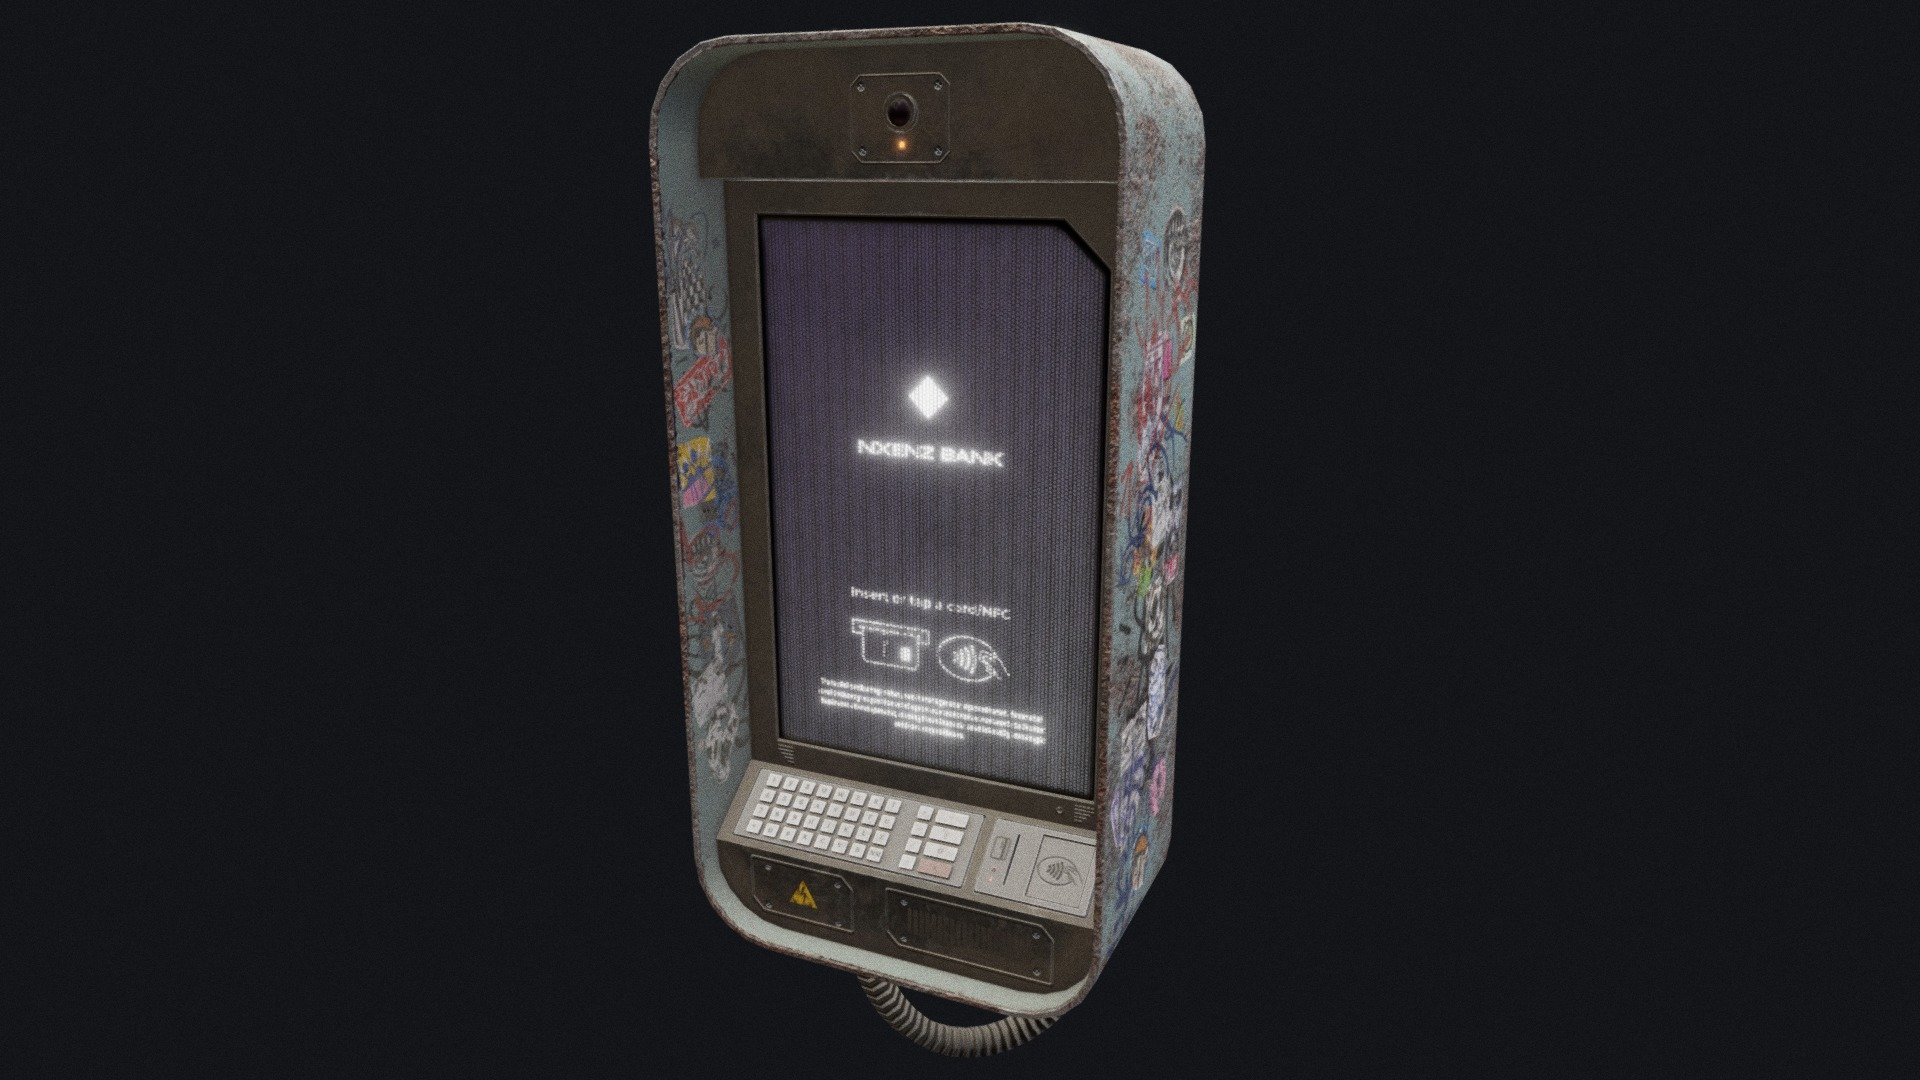 Game ready, Low-poly Cyberpunk ATM with 2k PBR Textures (Base_color, Emissive, Height, Metallic, Normal, Opacity, Roughness,Ambient Occlusion) You can upload your own images to your device screen by modifying the Screen.png file or upload a similar image with a 5:7 ratio

Purchase:  https://www.artstation.com/a/26274516 - Cyberpunk ATM - 3D model by Crazy_8 (@korboleevd) 3d model